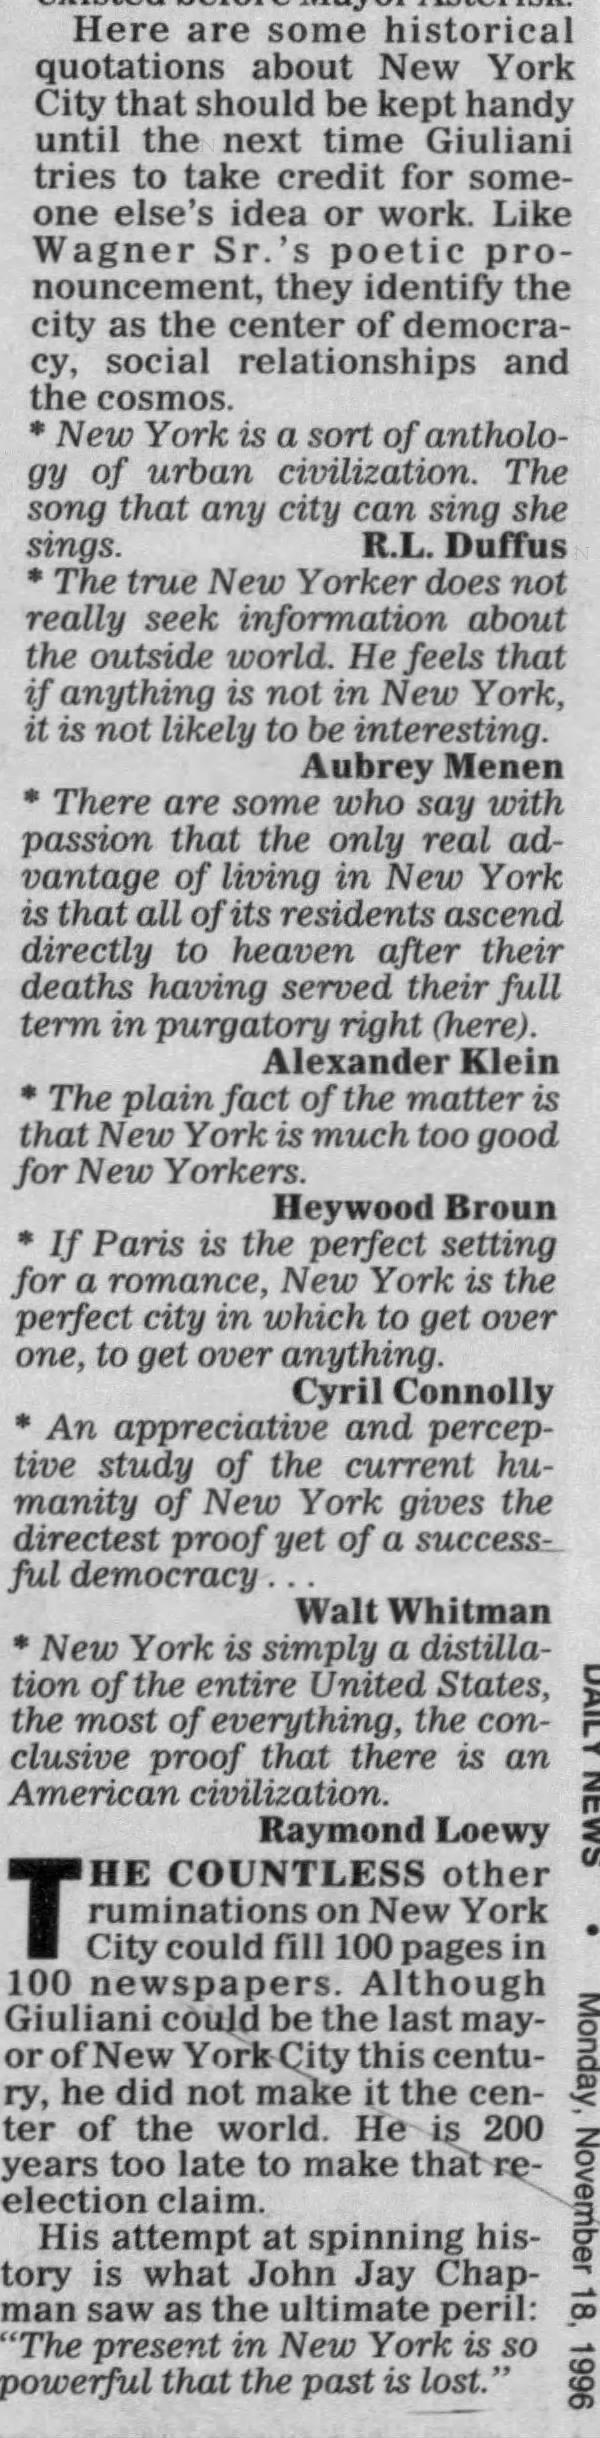 "New York is much too good for New Yorkers." -- Heywood Broun (1996).